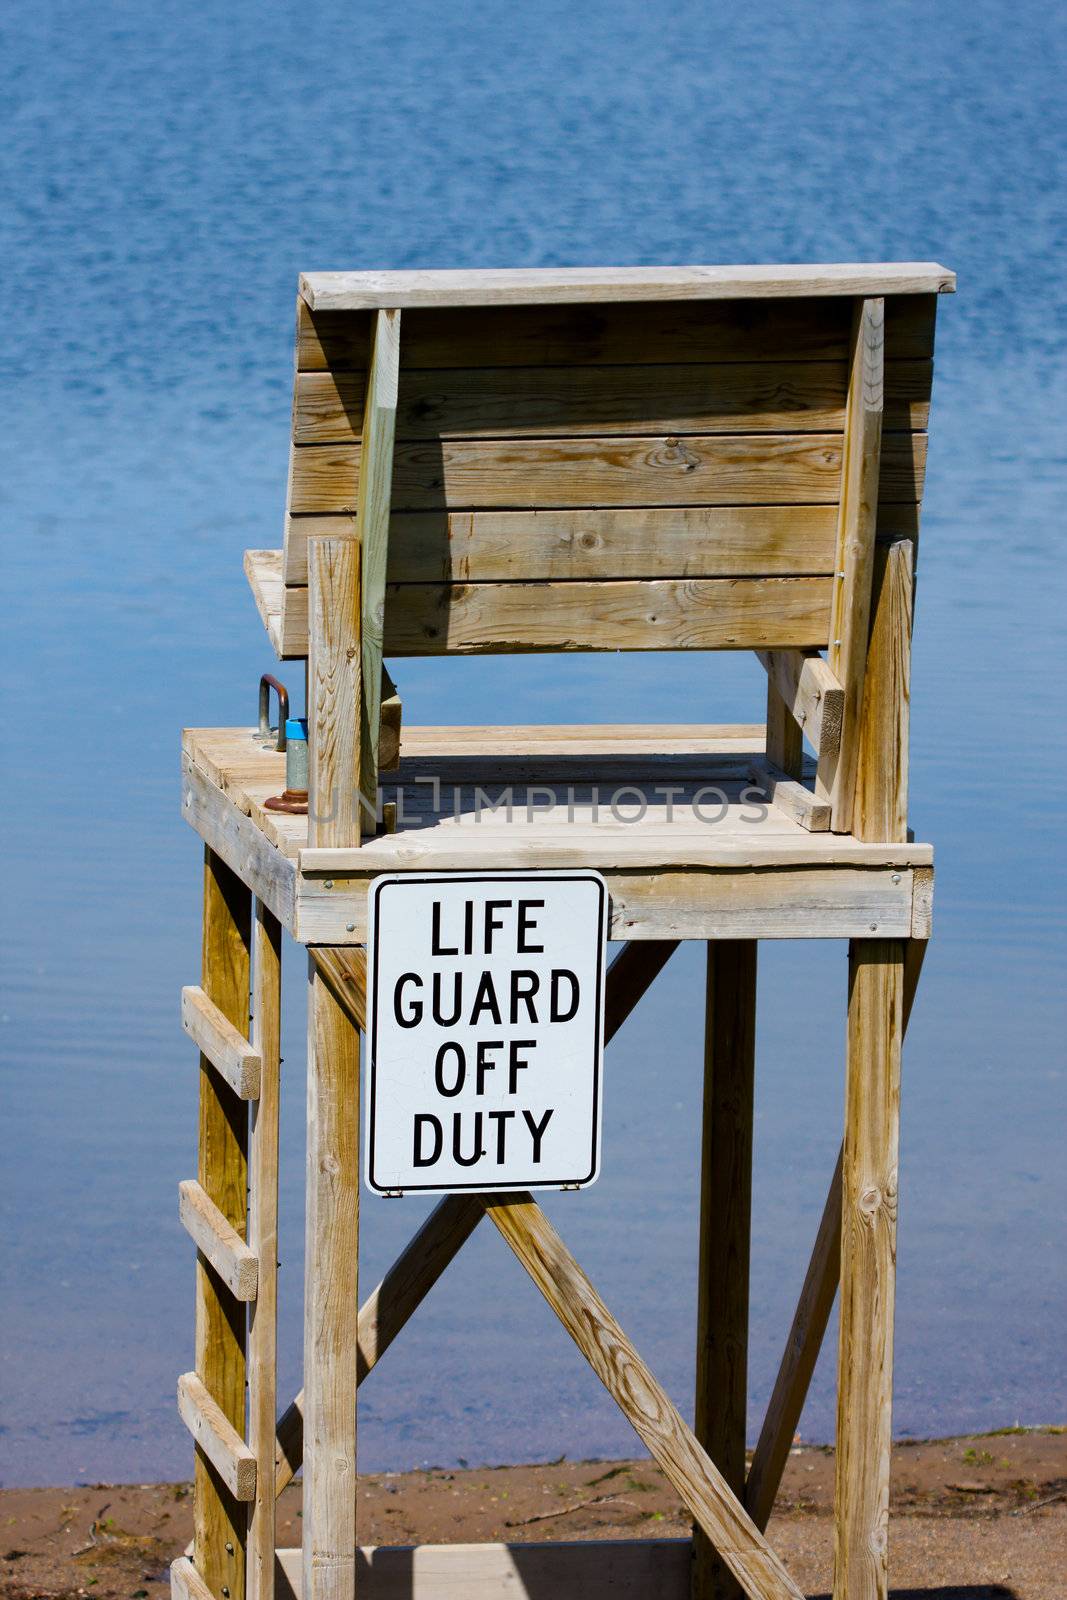 Life Guard off Duty chair at the beach.